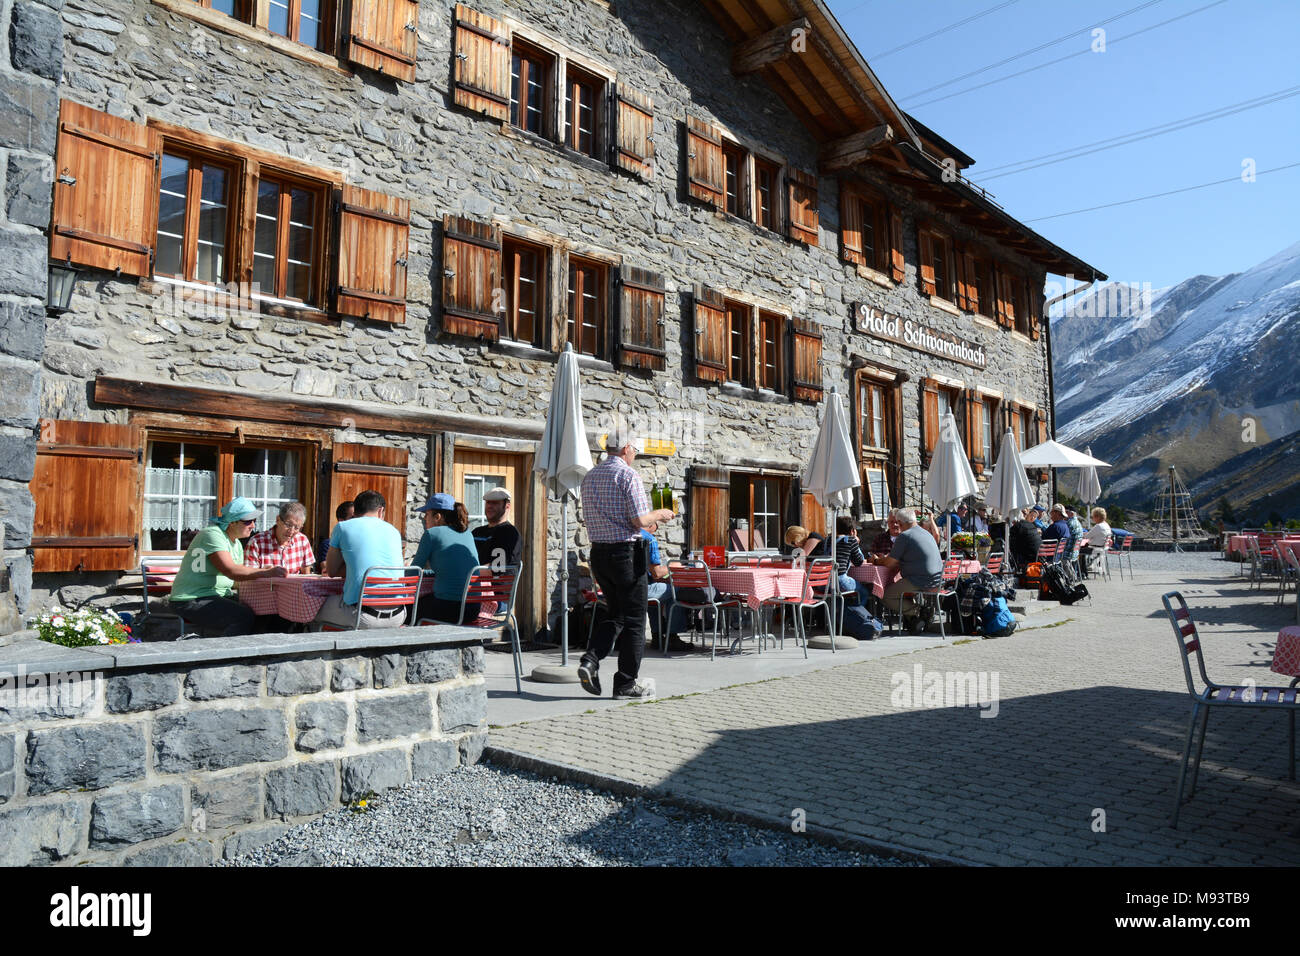 A cafe along the Bernese-Oberland hiking route through the Gemmi Pass in the Bernese Alps near the Swiss town of Leukerbad, Valais, Switzerland. Stock Photo